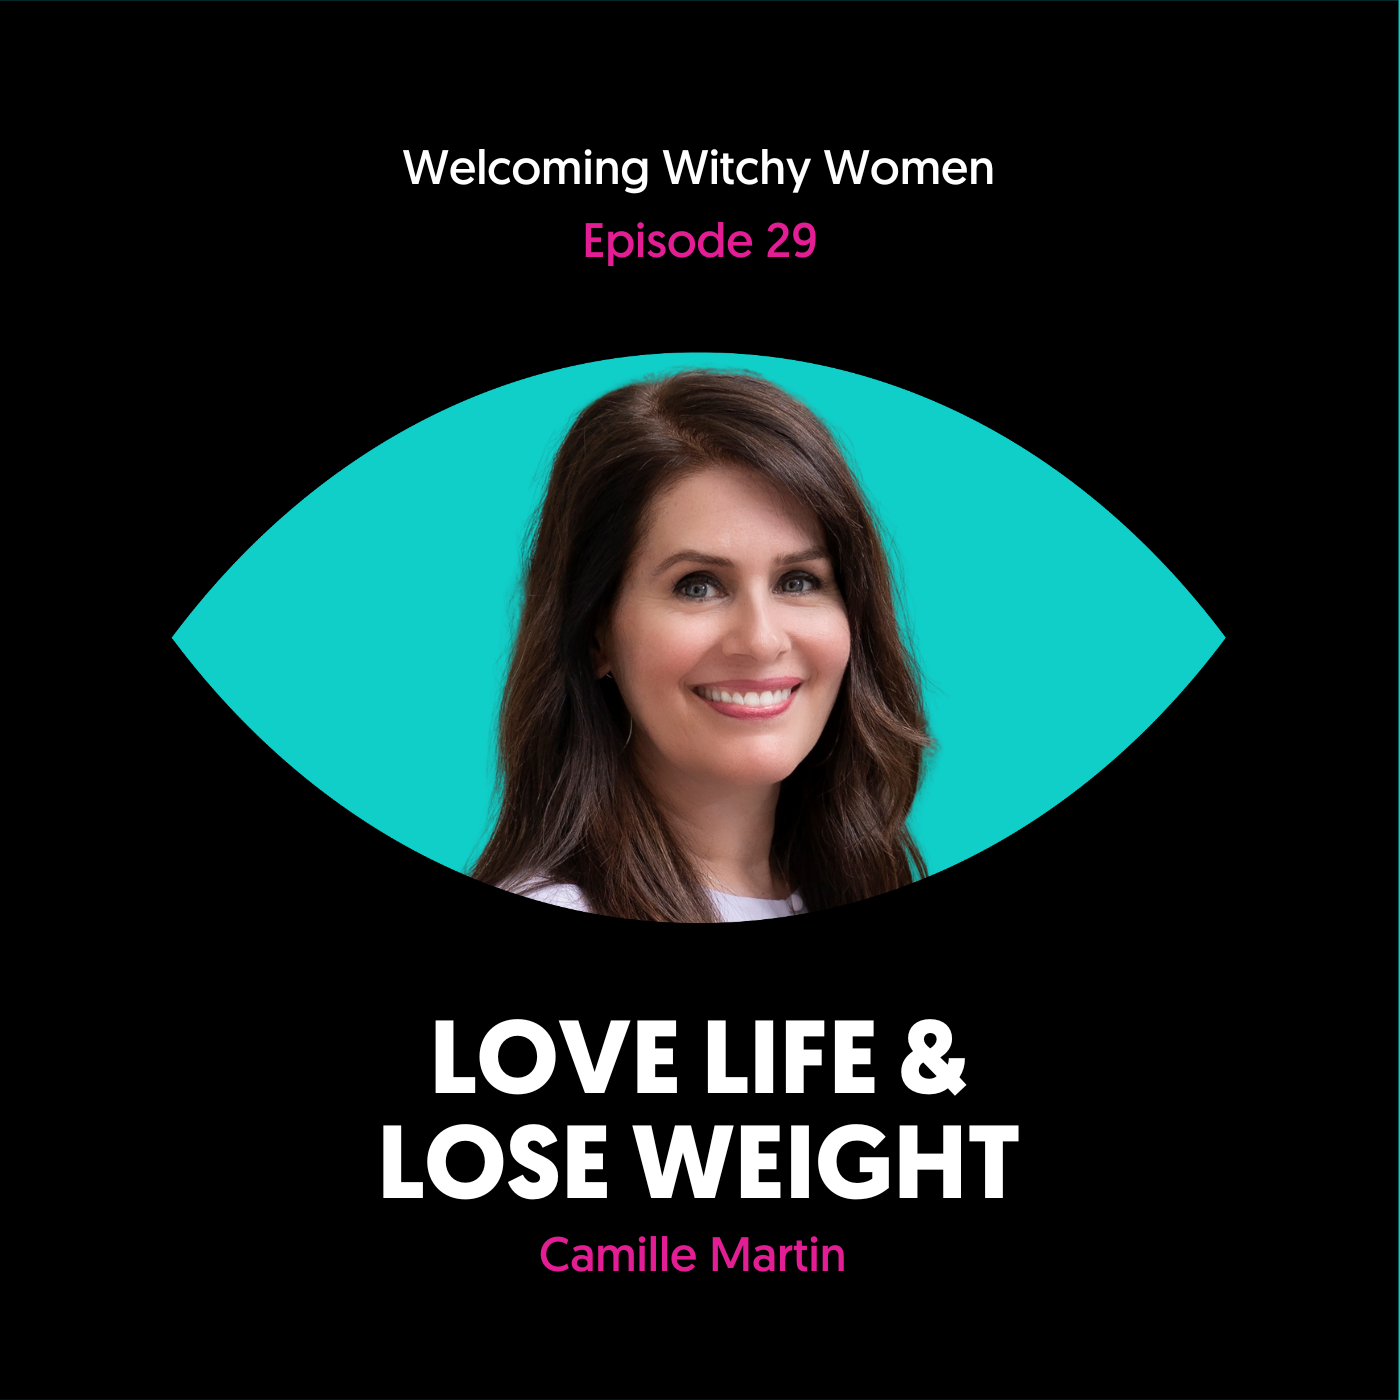 Love Life & Lose Weight with Camille Martin